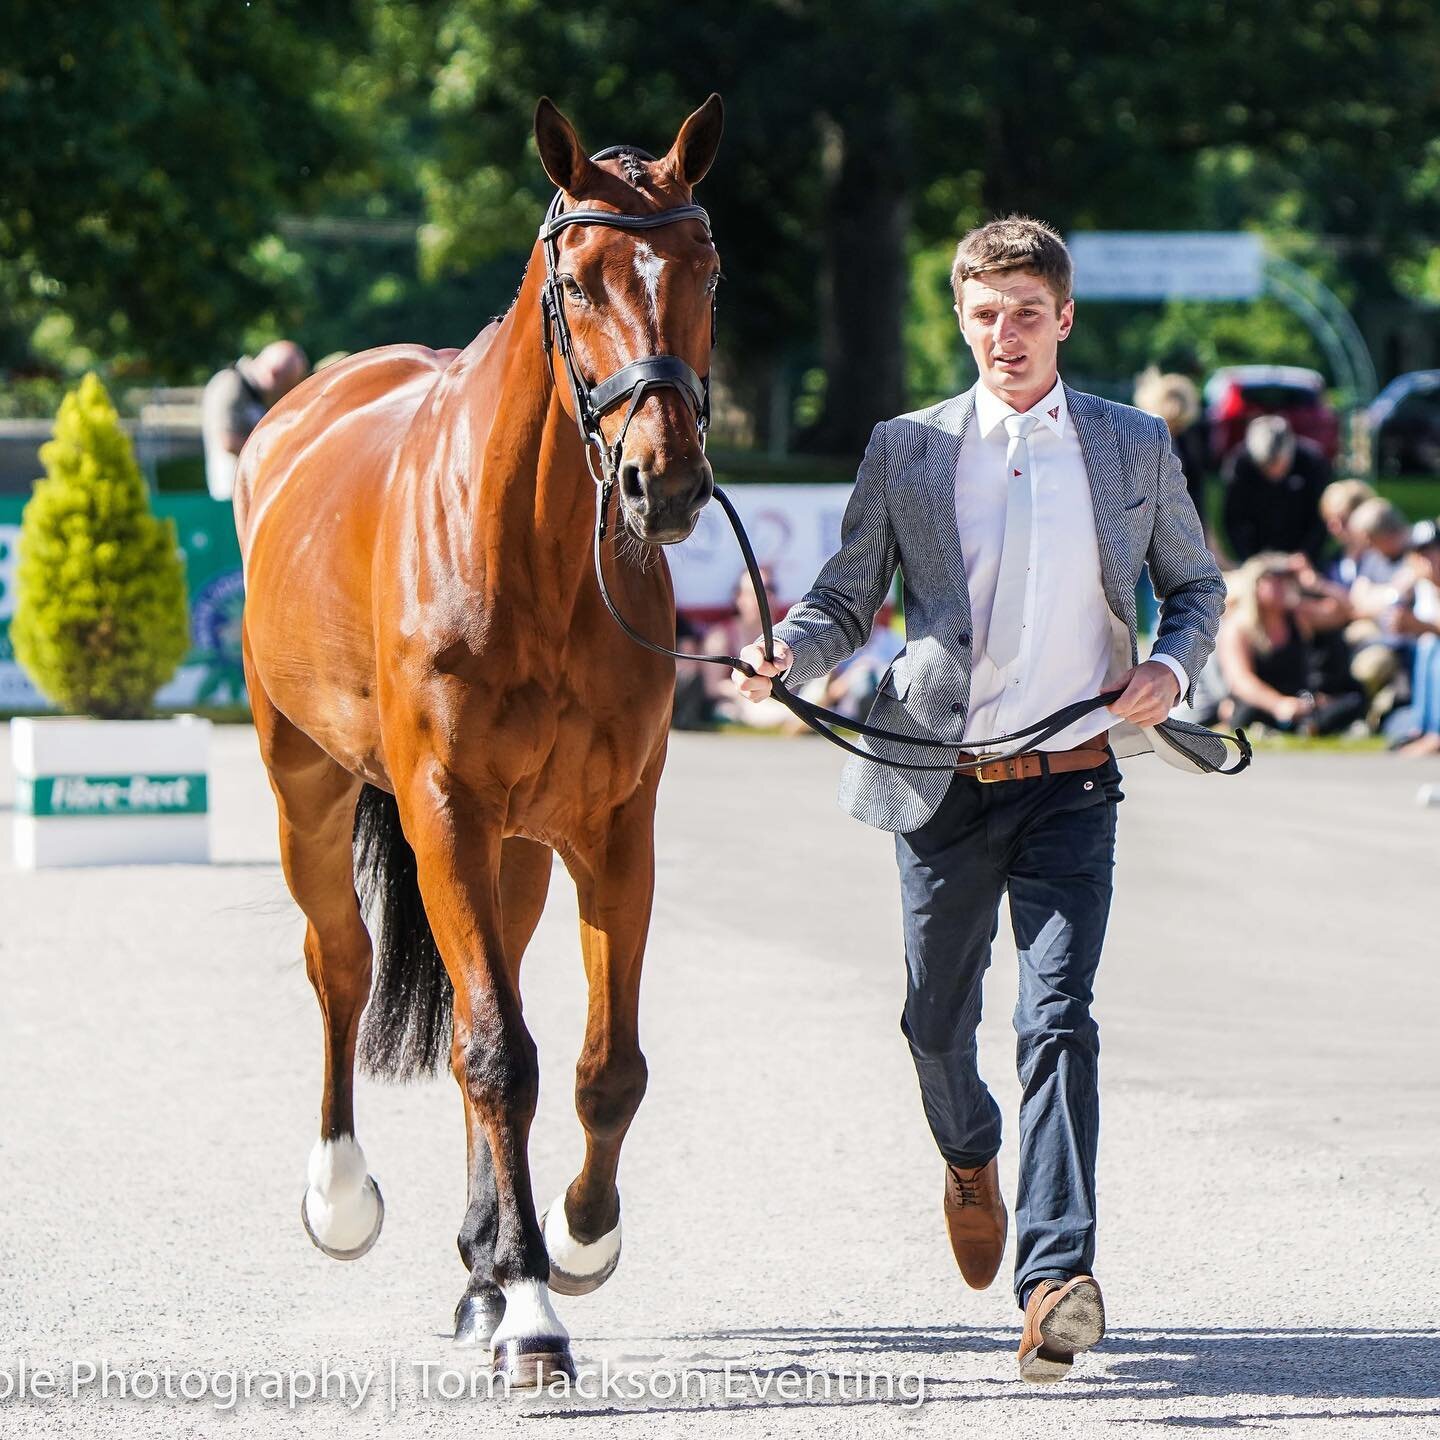 CCI4*L trot up ✅ with Farndon @bramhamhorse 

Farndon looking a million dollars thanks to @gabi_pitman along with @topspec_horse_feeds 👀 at that shine and  @fairfaxsaddles!

@event.collection kindly had me dressed from head to toe! 

📸 @justmshanna